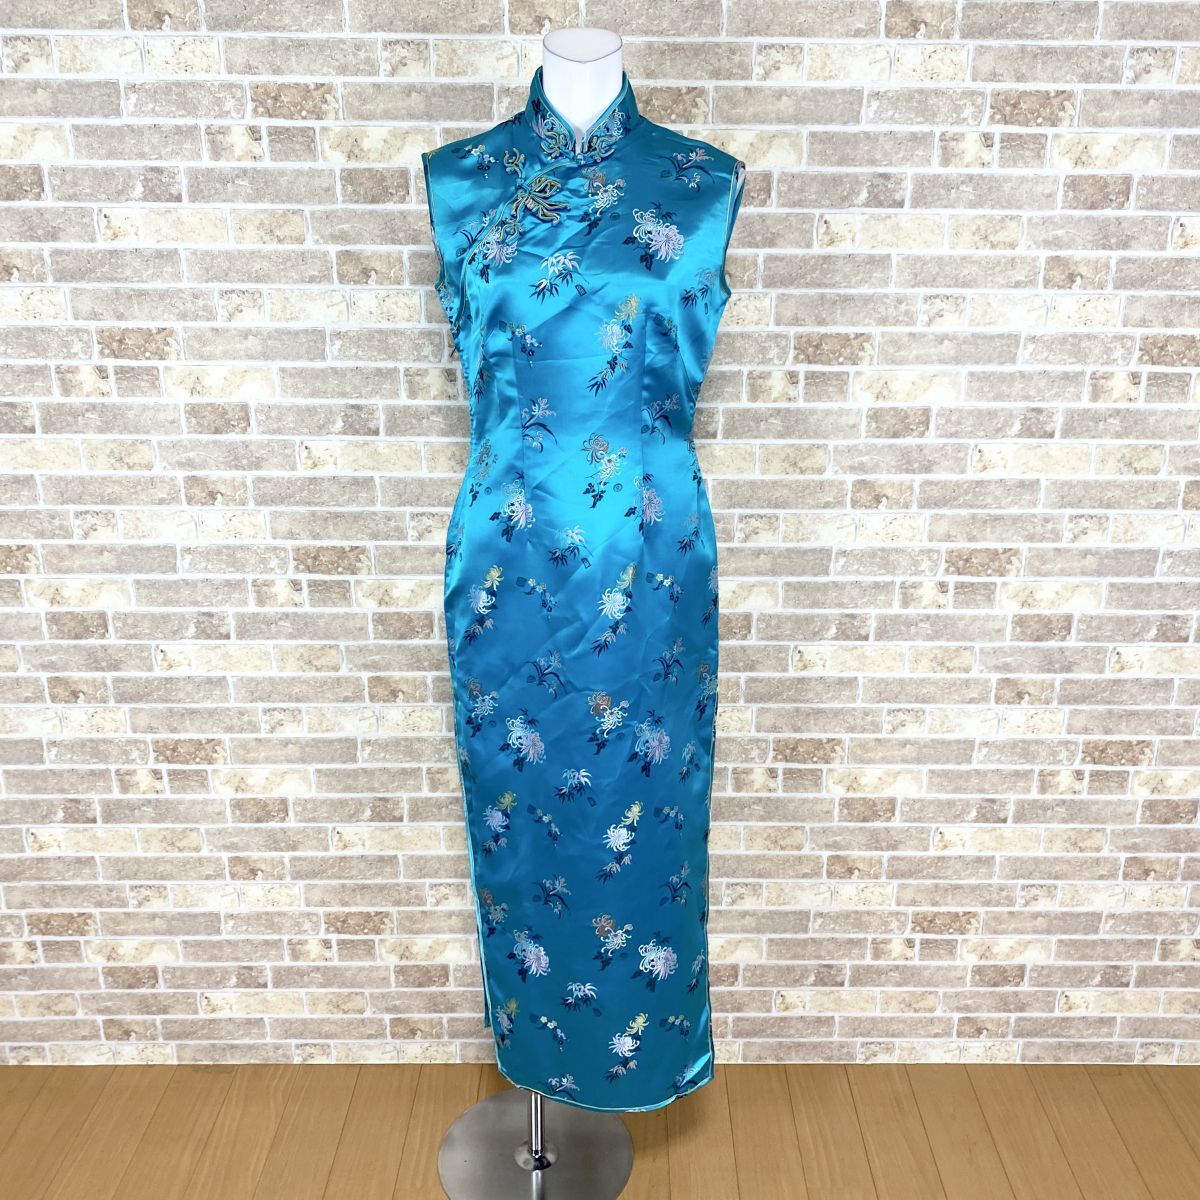 1 jpy China dress dragon . middle type clothes equipment shop sleeve less long One-piece blue pattern color dress kyabadore presentation formal used 4722